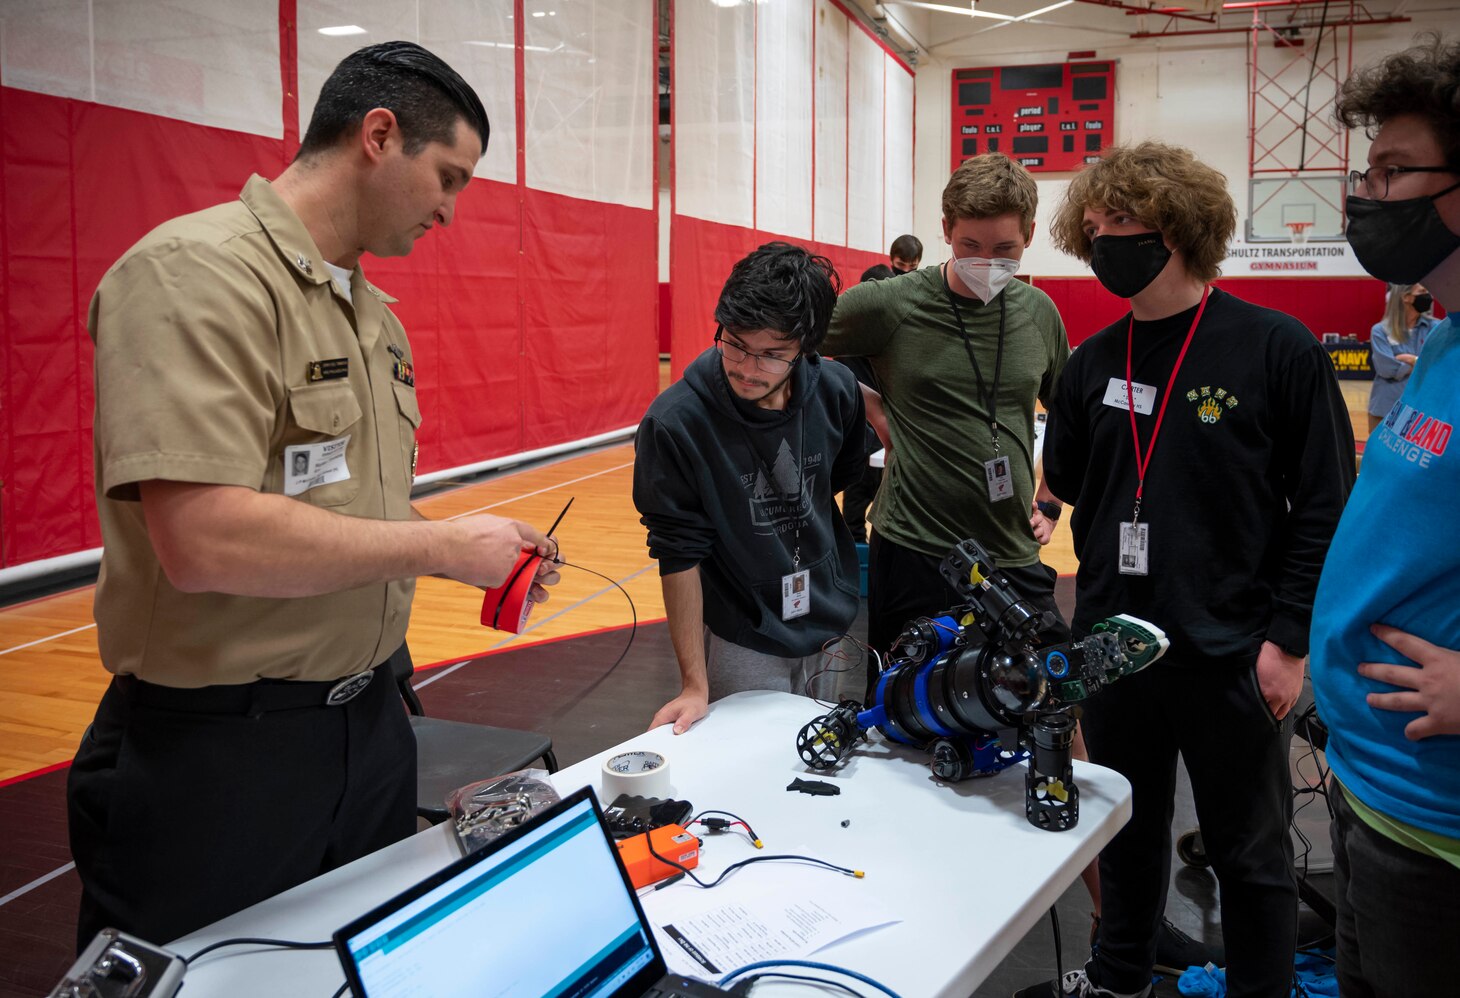 A Sailor helps J.P. McCaskey High School students resolve an issue with their submersible during the Sea, Air and Land Challenge held in Lancaster, Pennsylvania, May 4, 2022.